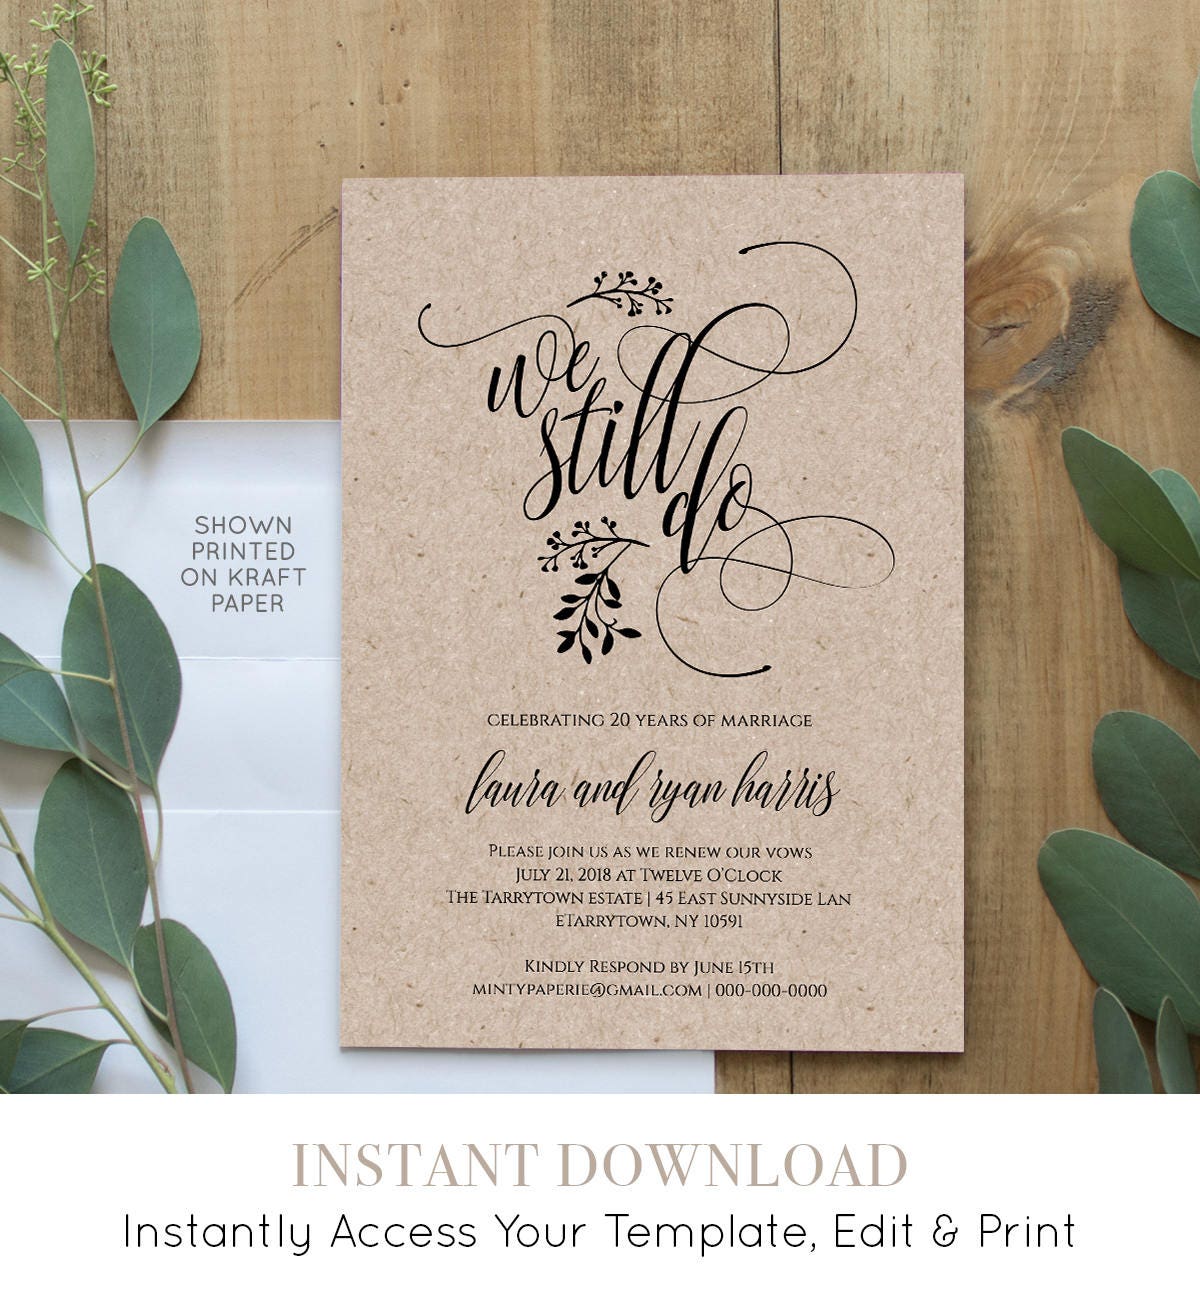 vow-renewal-invitation-template-printable-we-still-do-instant